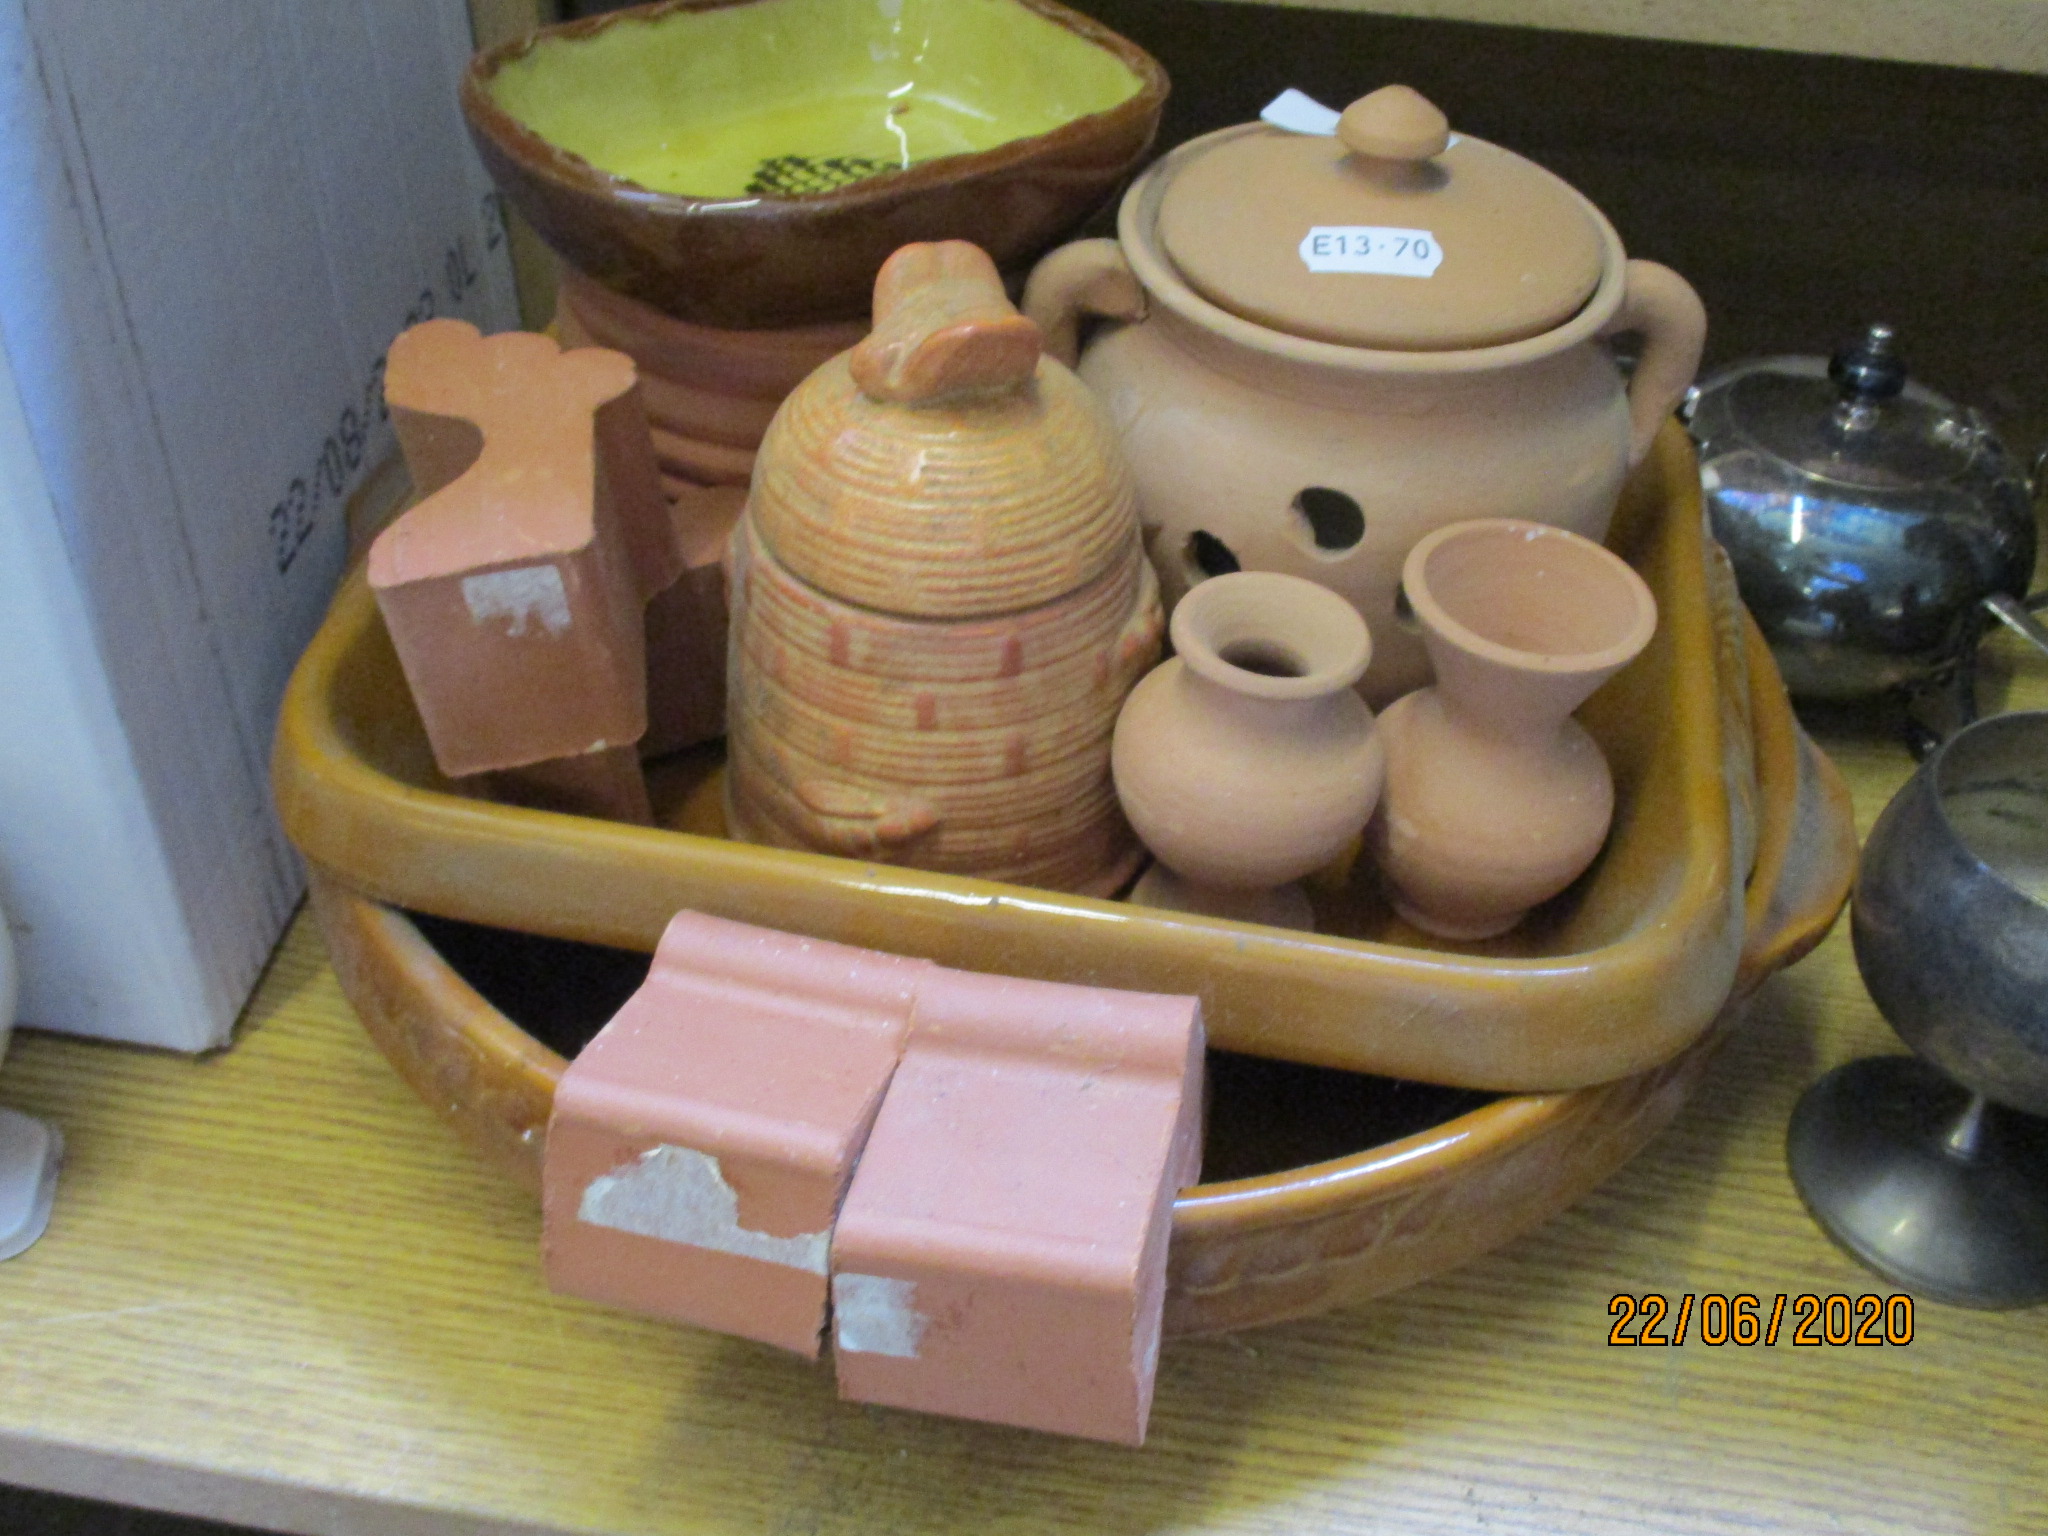 COLLECTION OF VARIOUS TERRACOTTA AND OTHER KITCHEN WARES